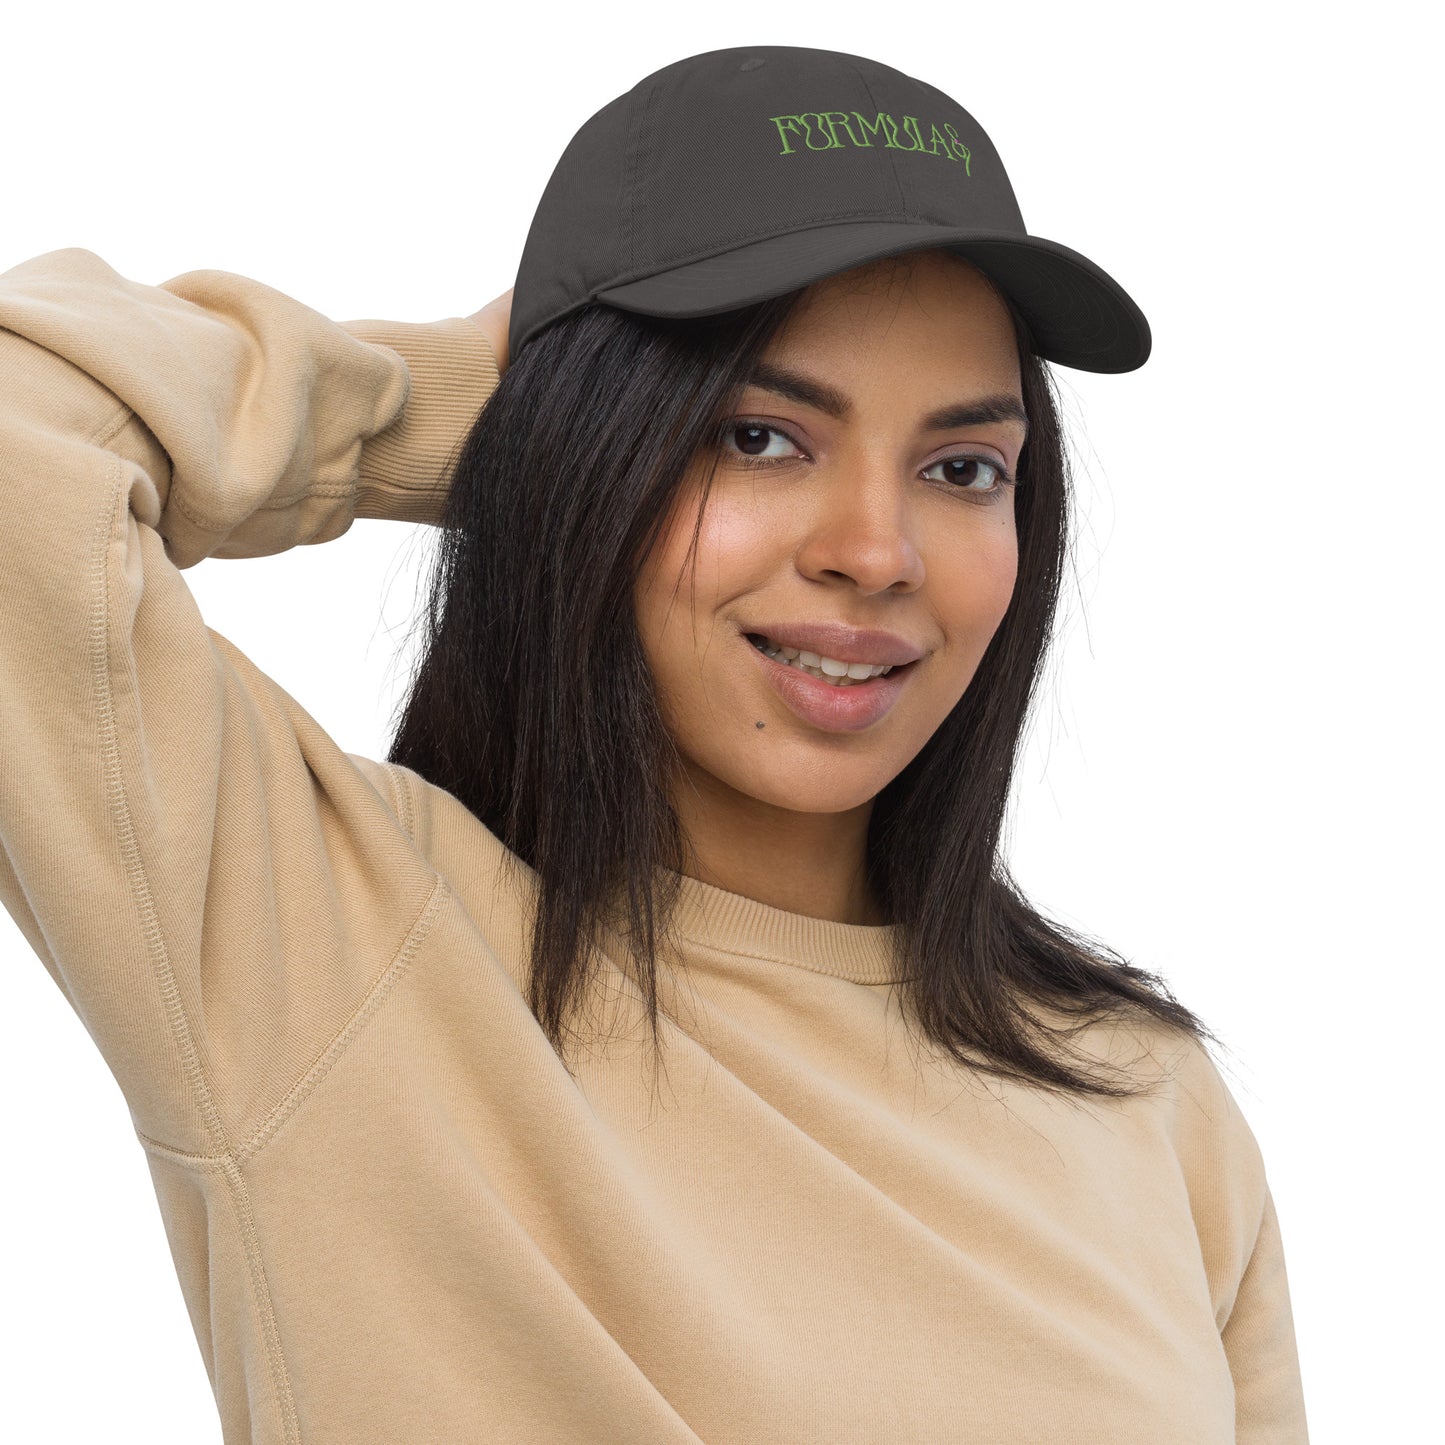 Formula S7 Green Embroidery Organic dad hat